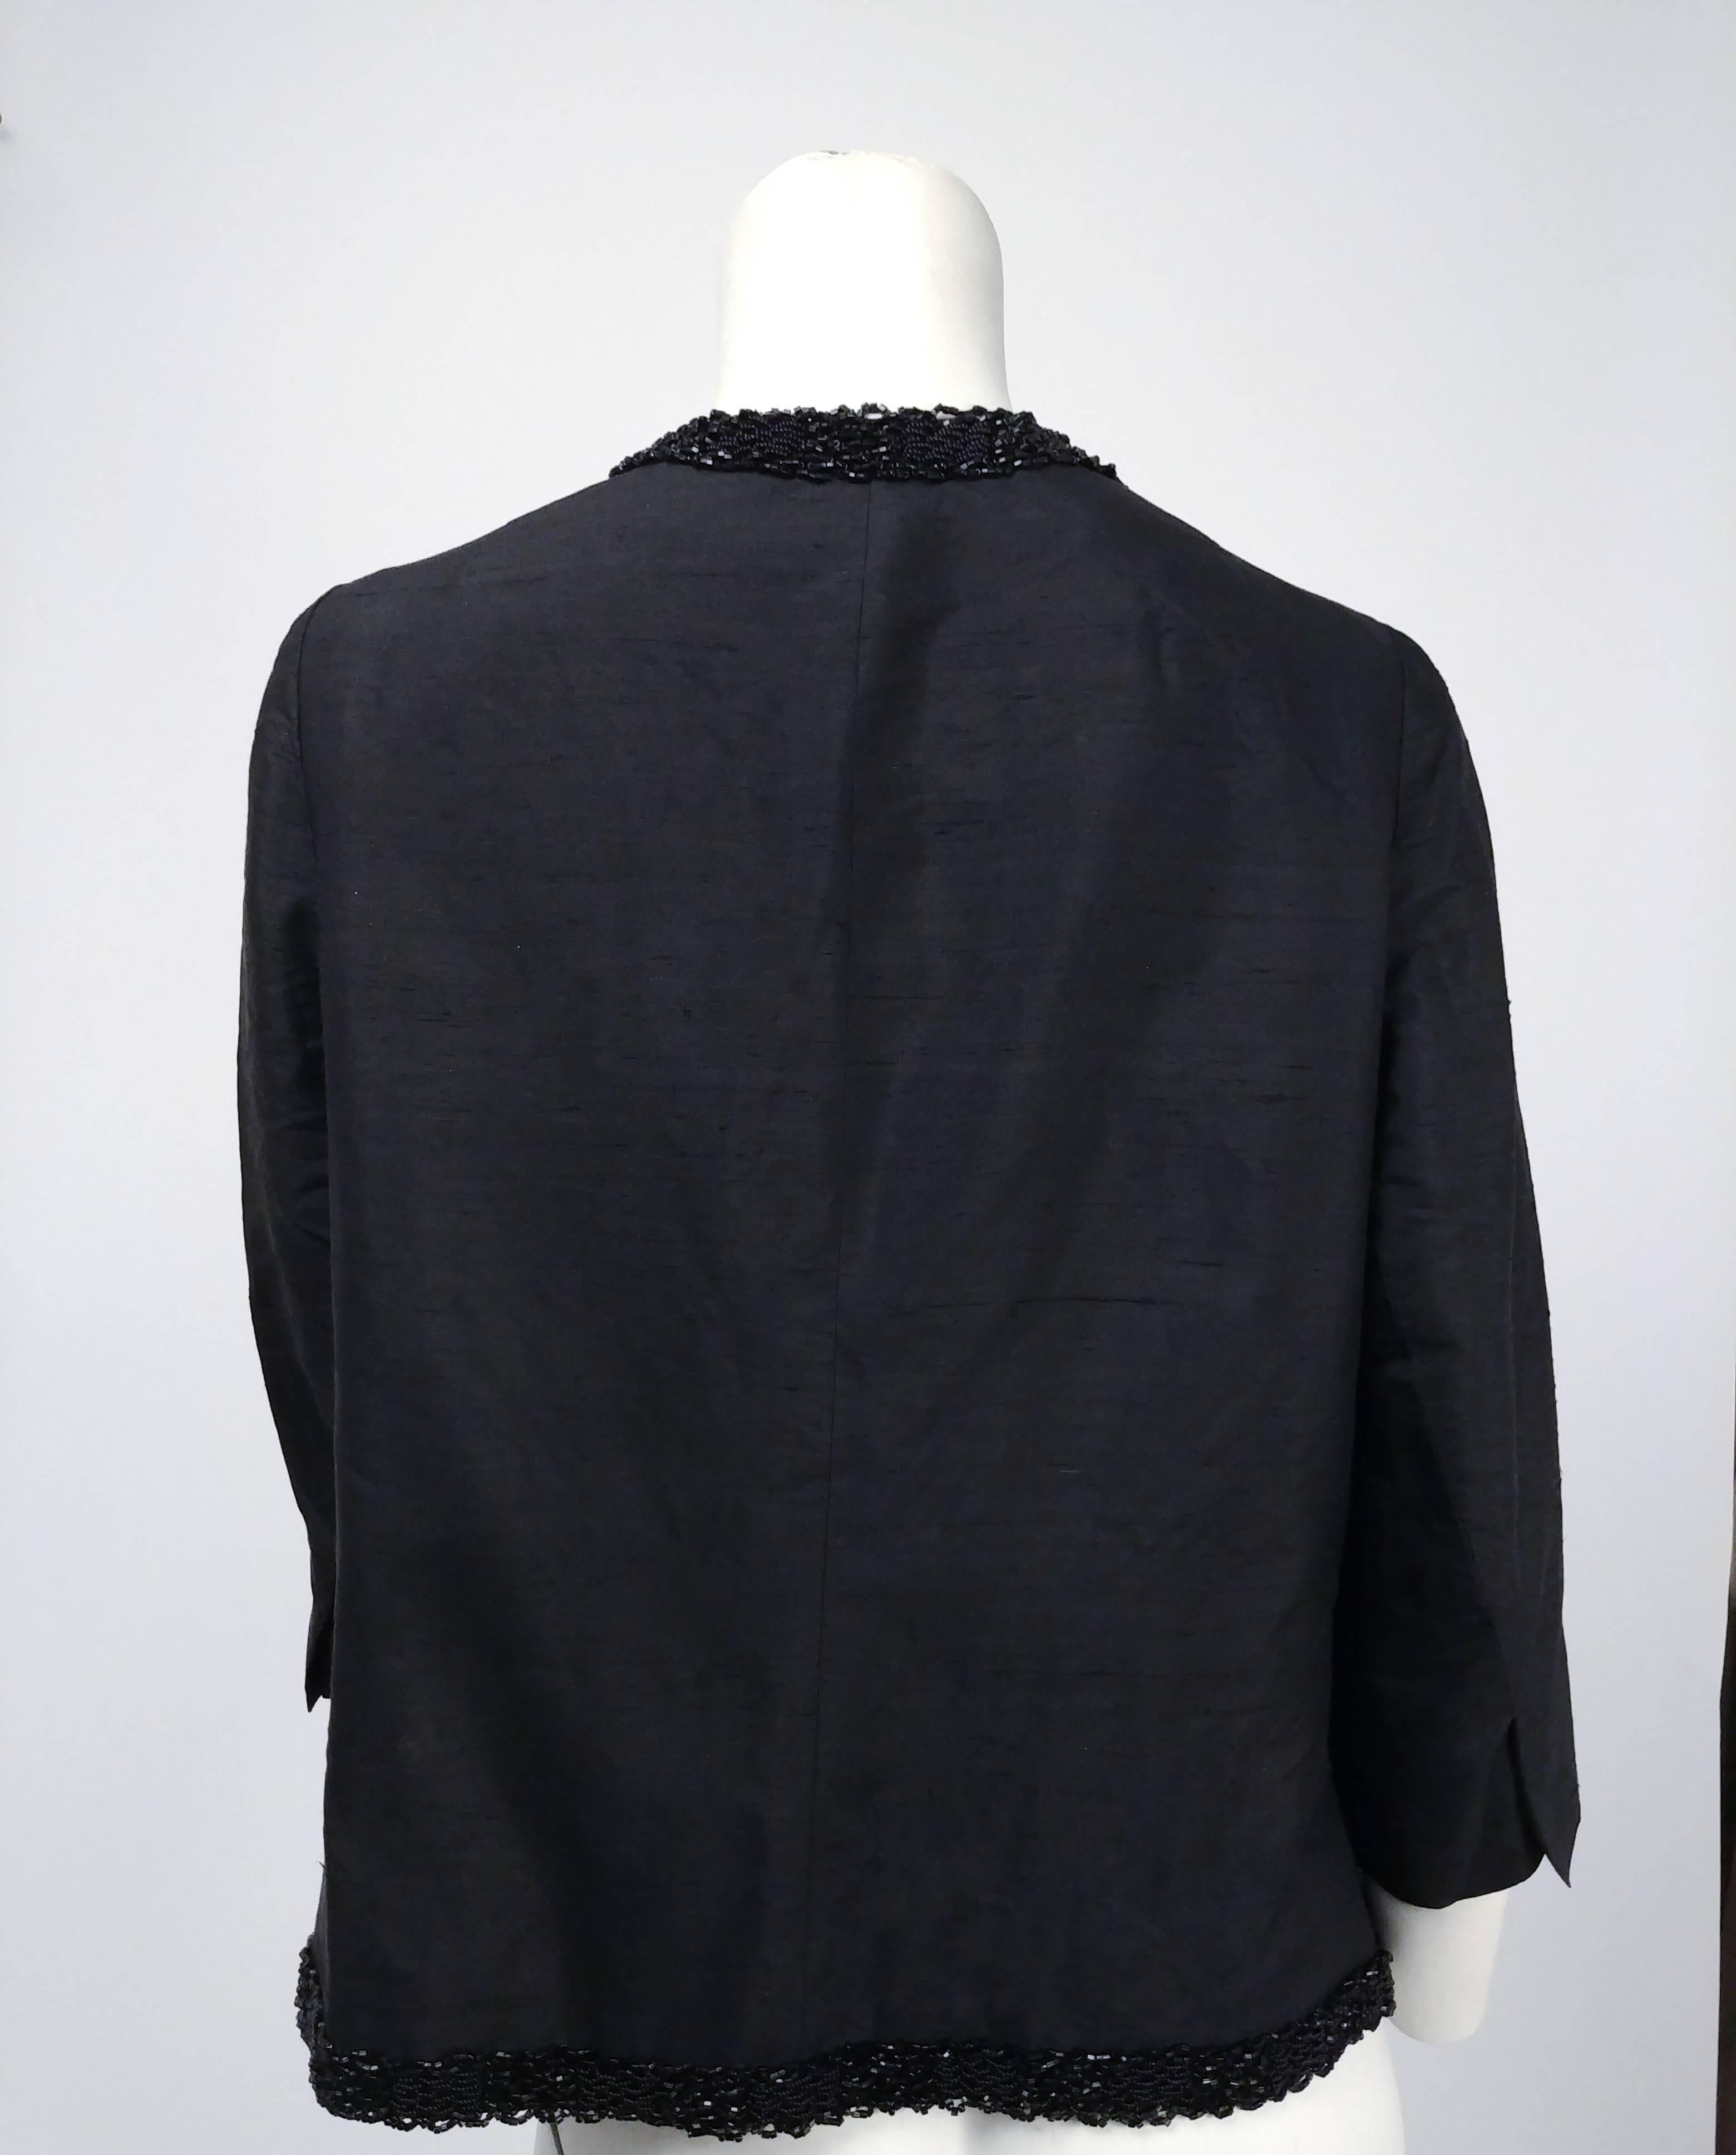 Shantung Black Beaded Evening Jacket, 1960s  In Excellent Condition For Sale In San Francisco, CA